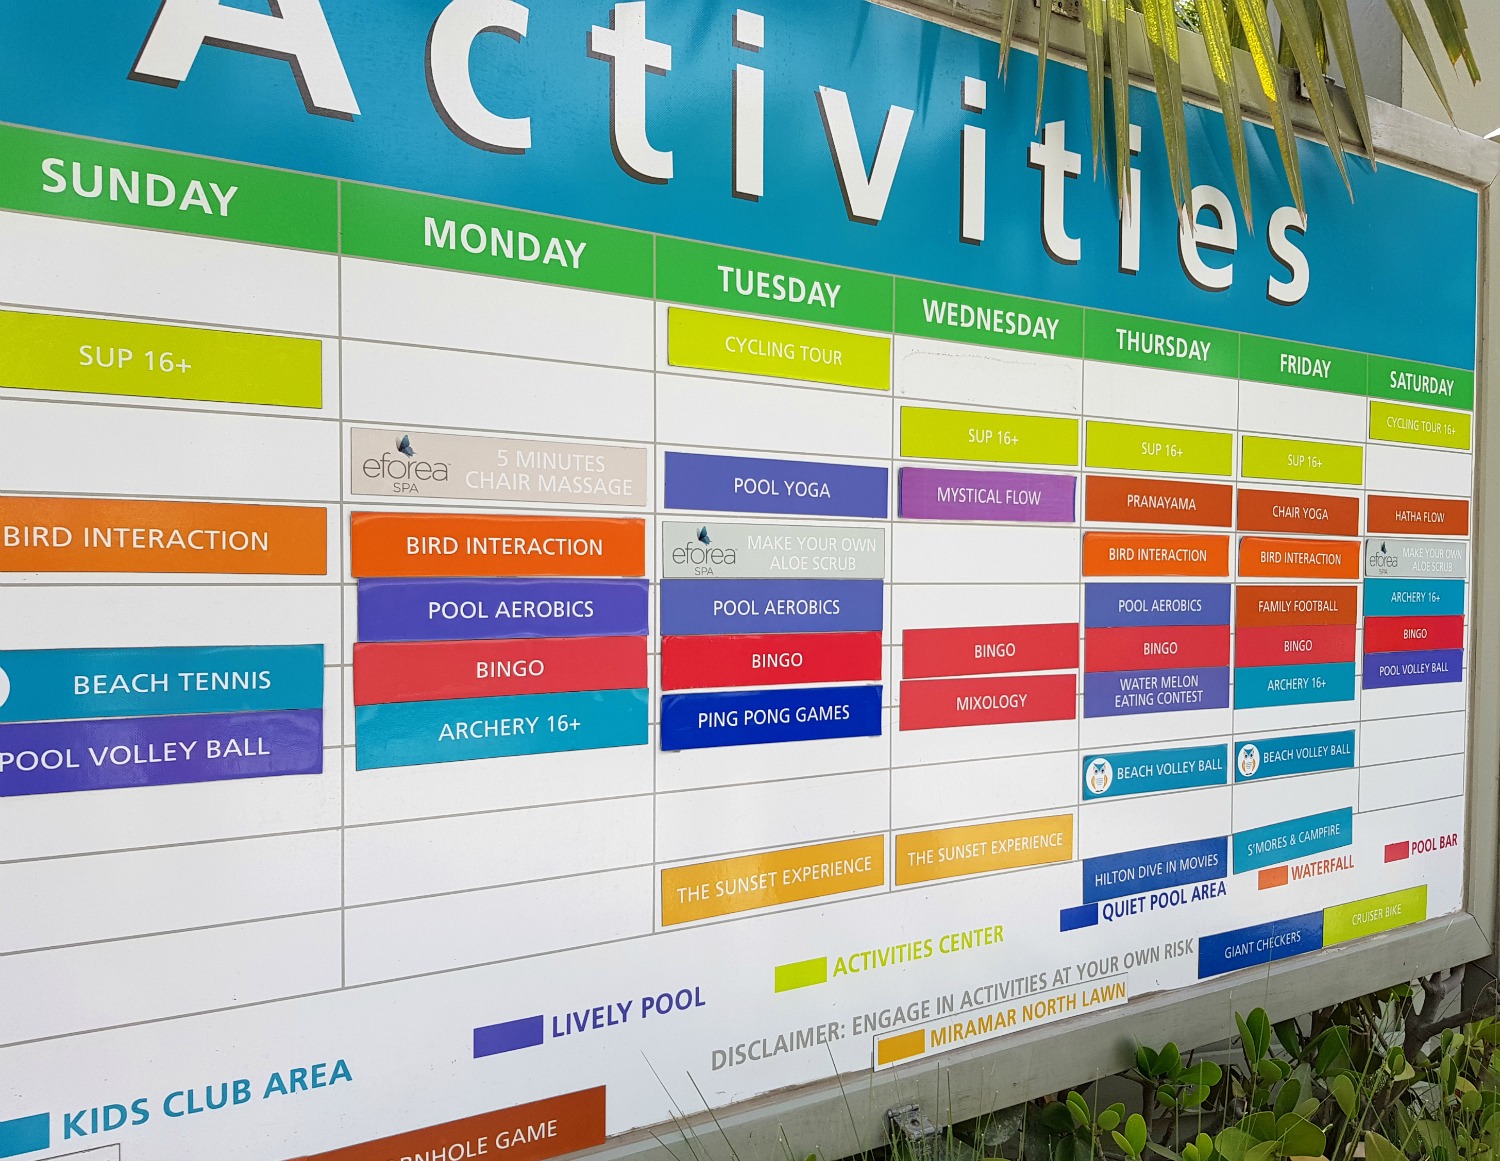 List of activities for guests on a board by the pool at the Hilton Aruba - my hotel review